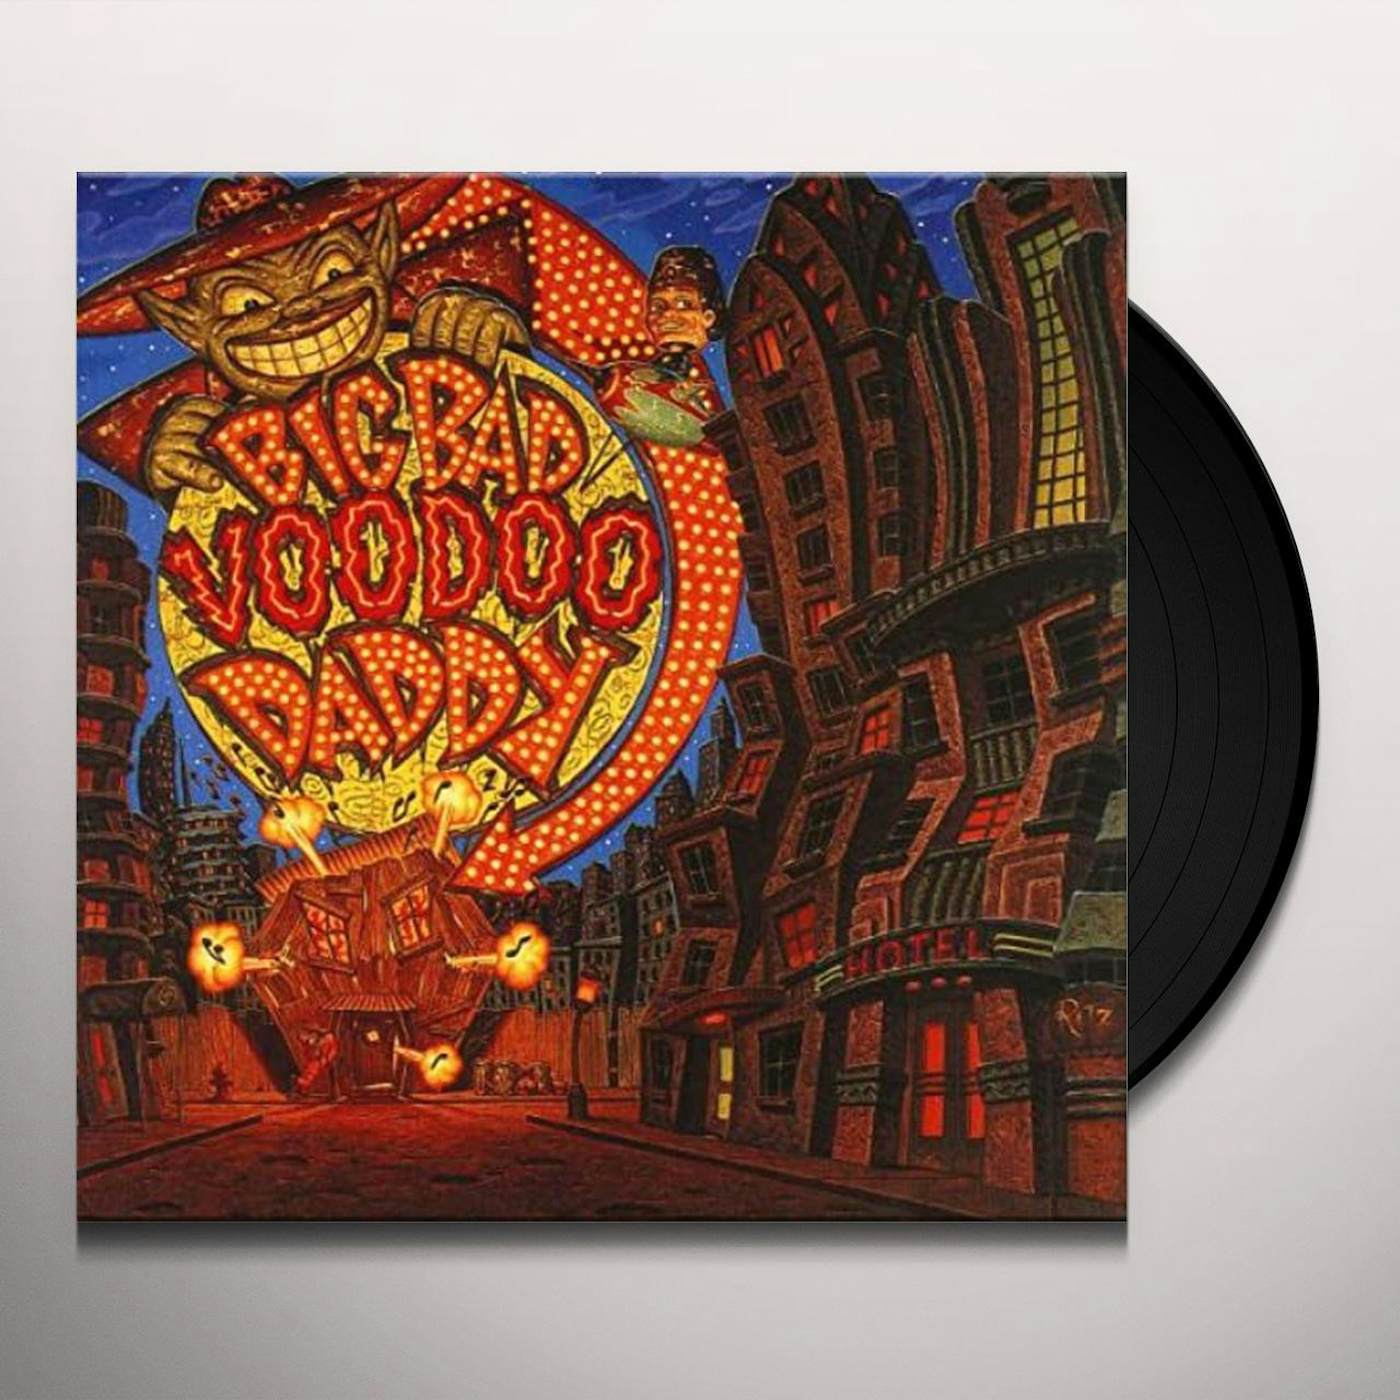 Big Bad Voodoo Daddy Everything You Want For Christmas Vinyl $39.99